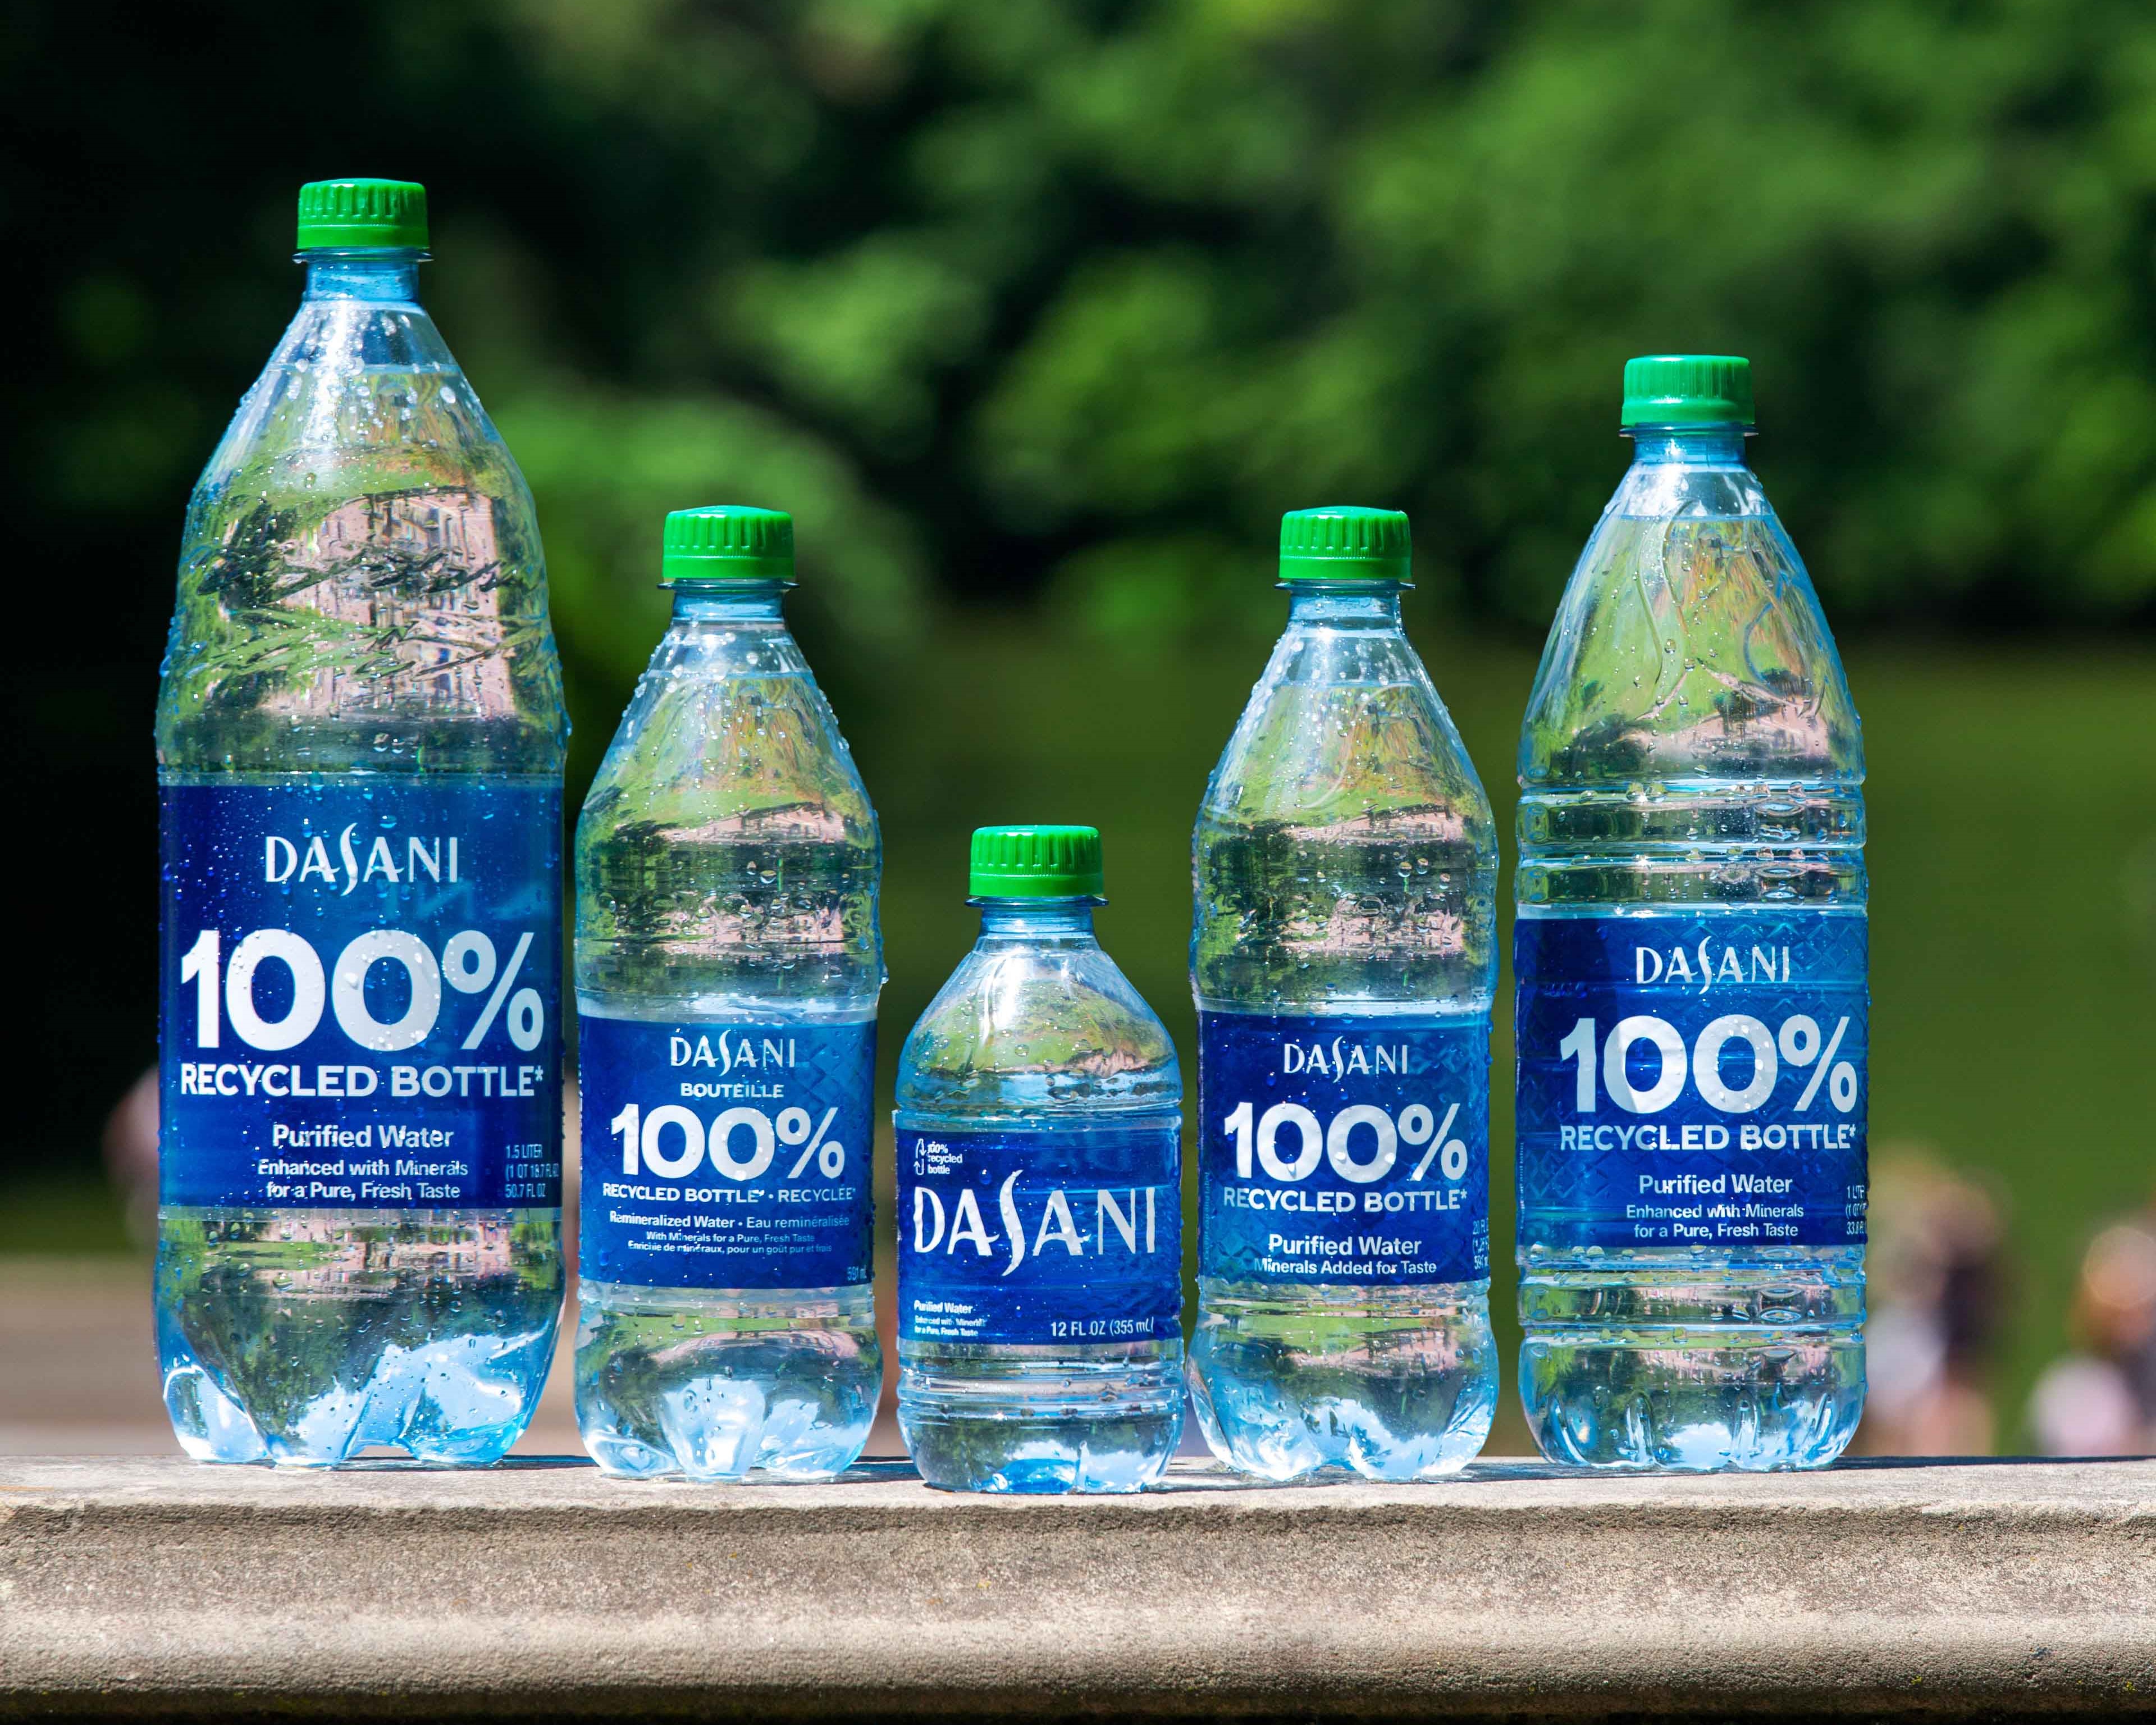 https://www.coca-colacompany.com/content/dam/company/us/en/sustainability/packaging-sustainability/Dasani%20100%20percent%20recycled%20bottle-5x4.jpg